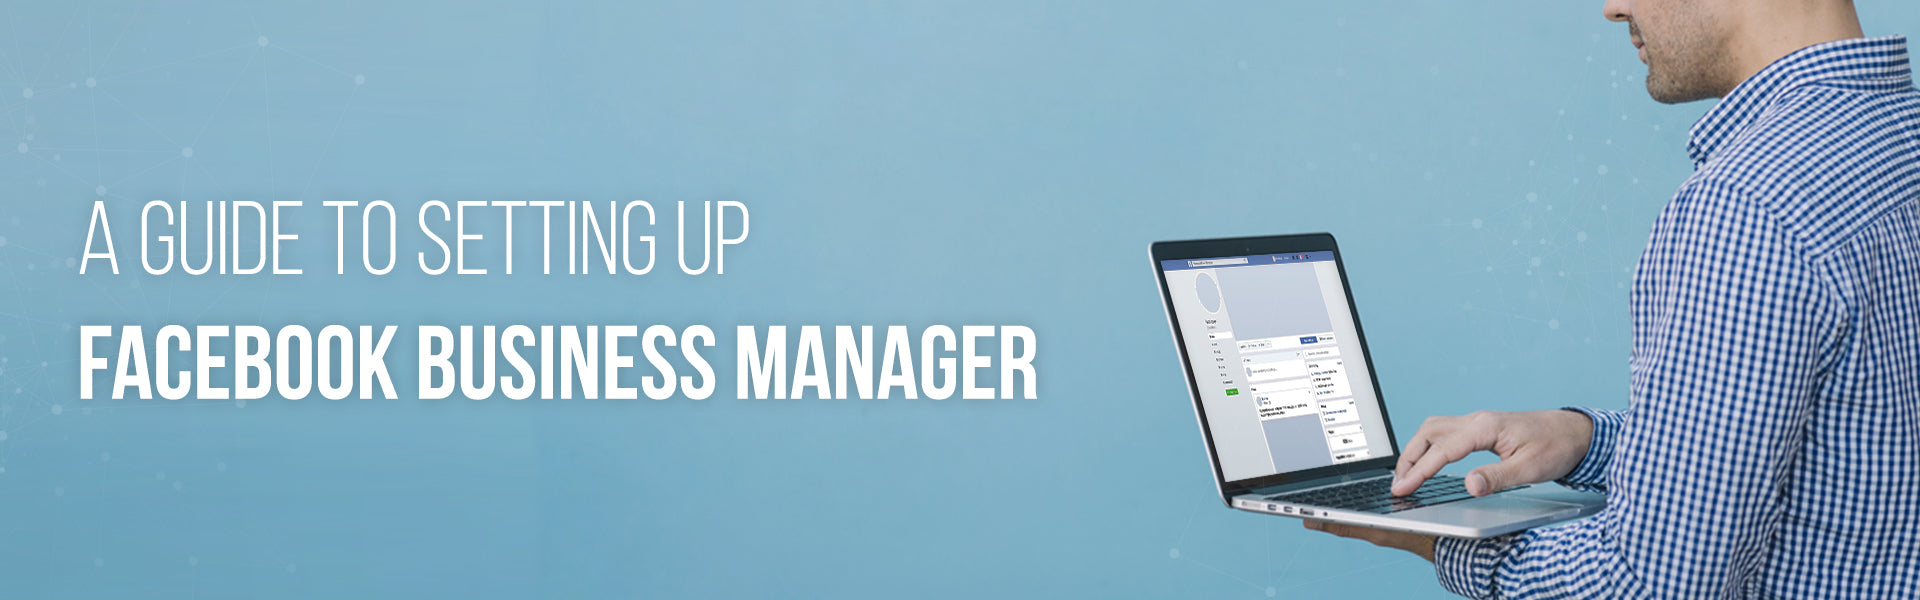 A Guide to Setting up Facebook Business Manager